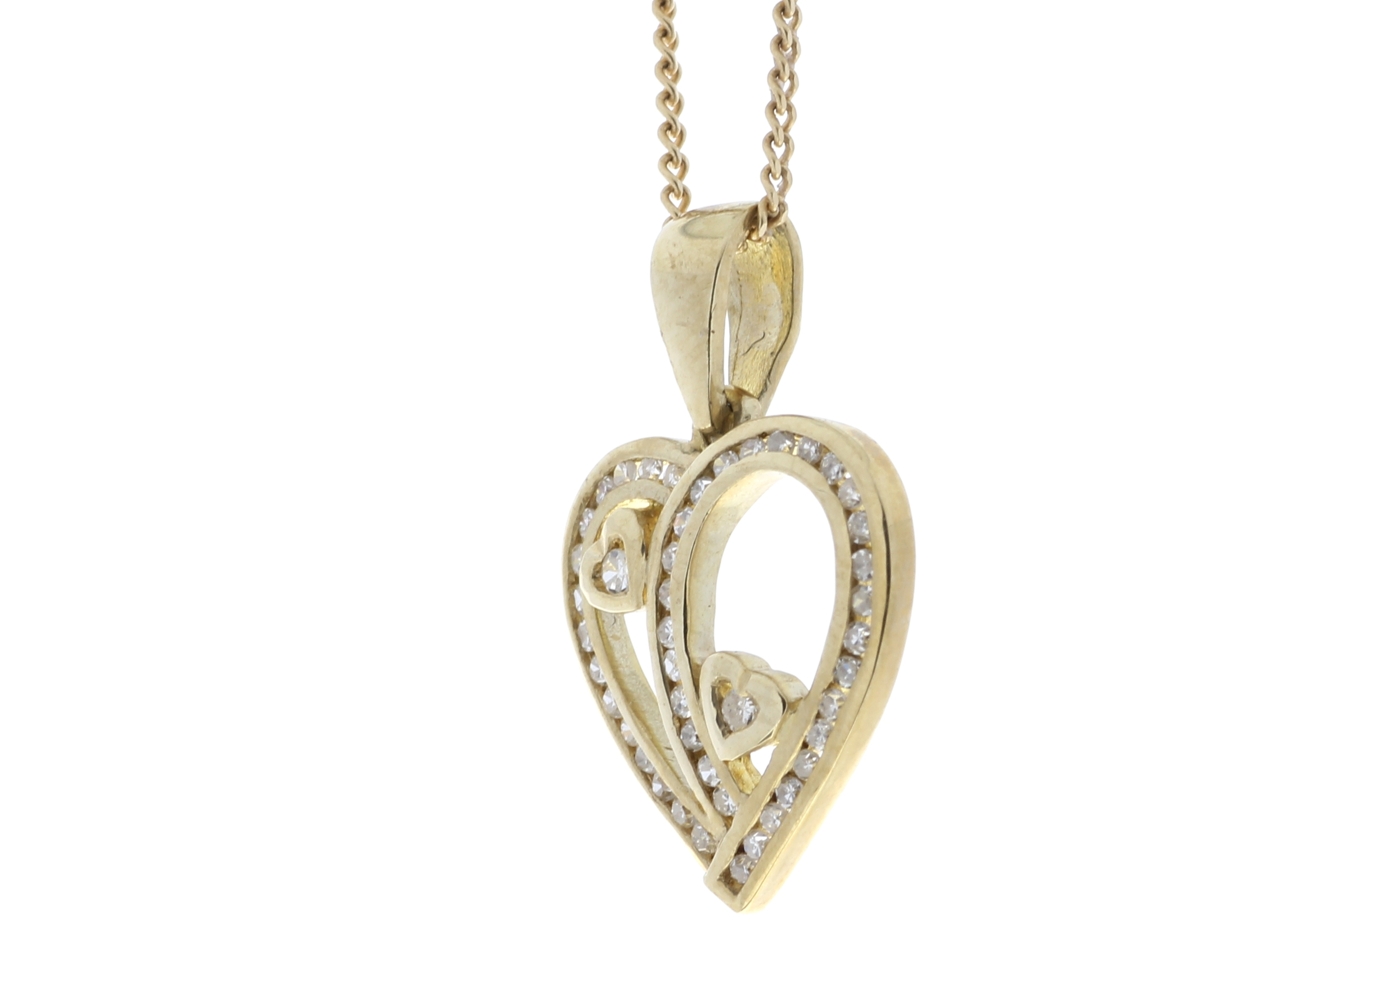 9ct Yellow Gold Heart Pendant Set With Diamonds 0.23 Carats - Image 3 of 5